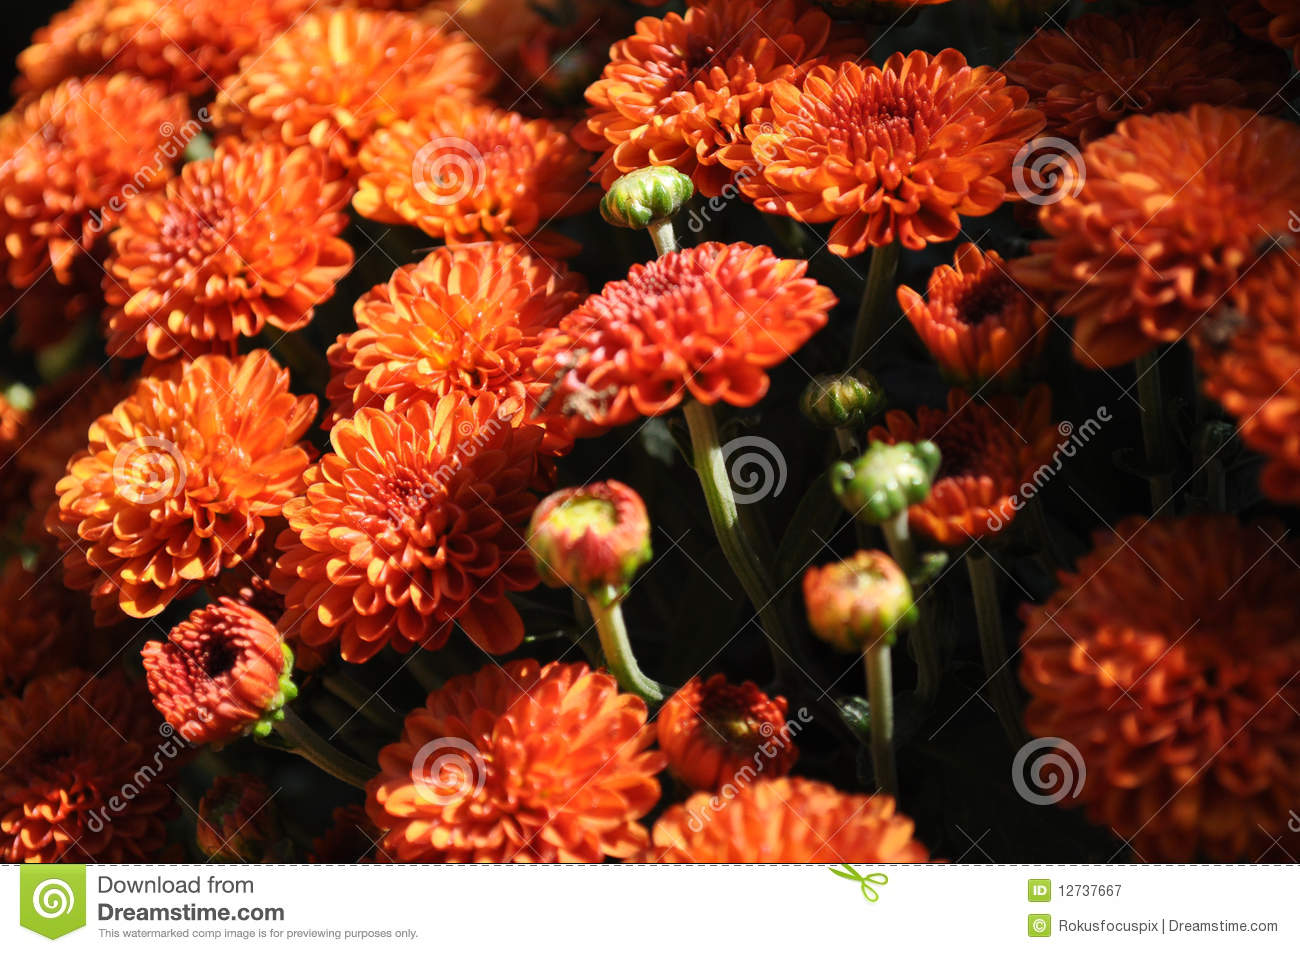 Fall Mums Royalty Free Stock Photography   Image  12737667